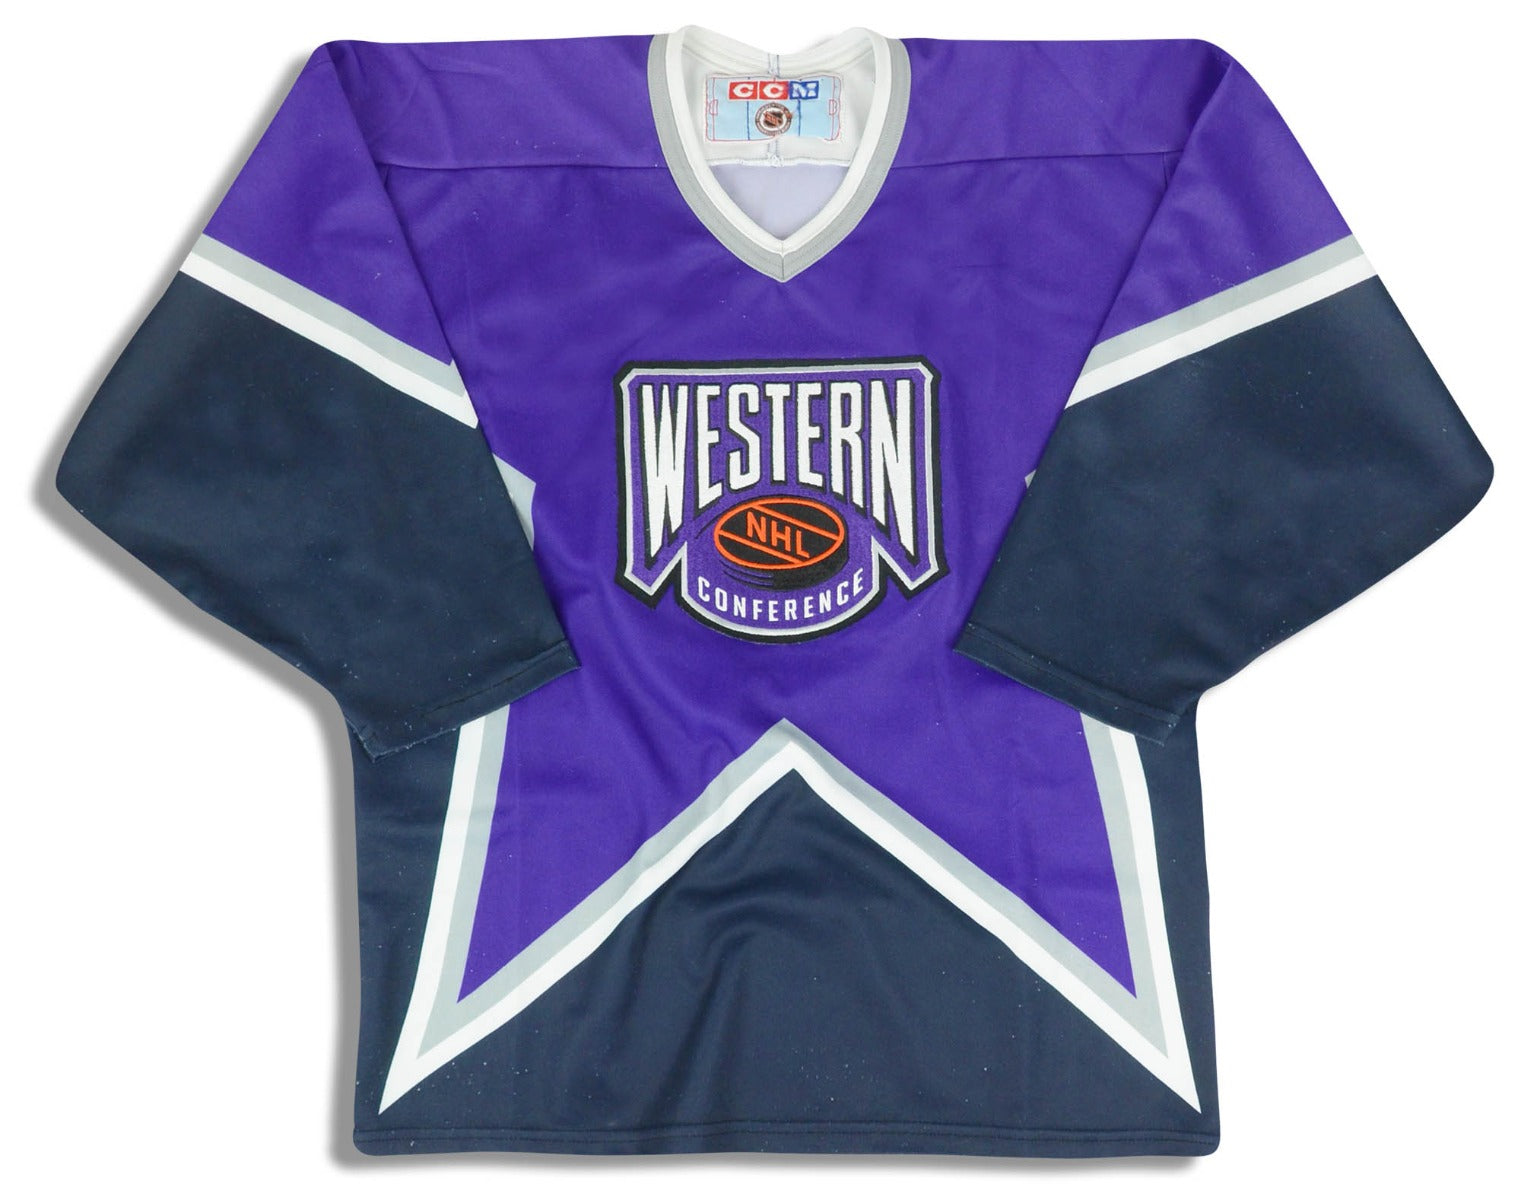 The jerseys from the 1996 NHL All-Star Game are all-time